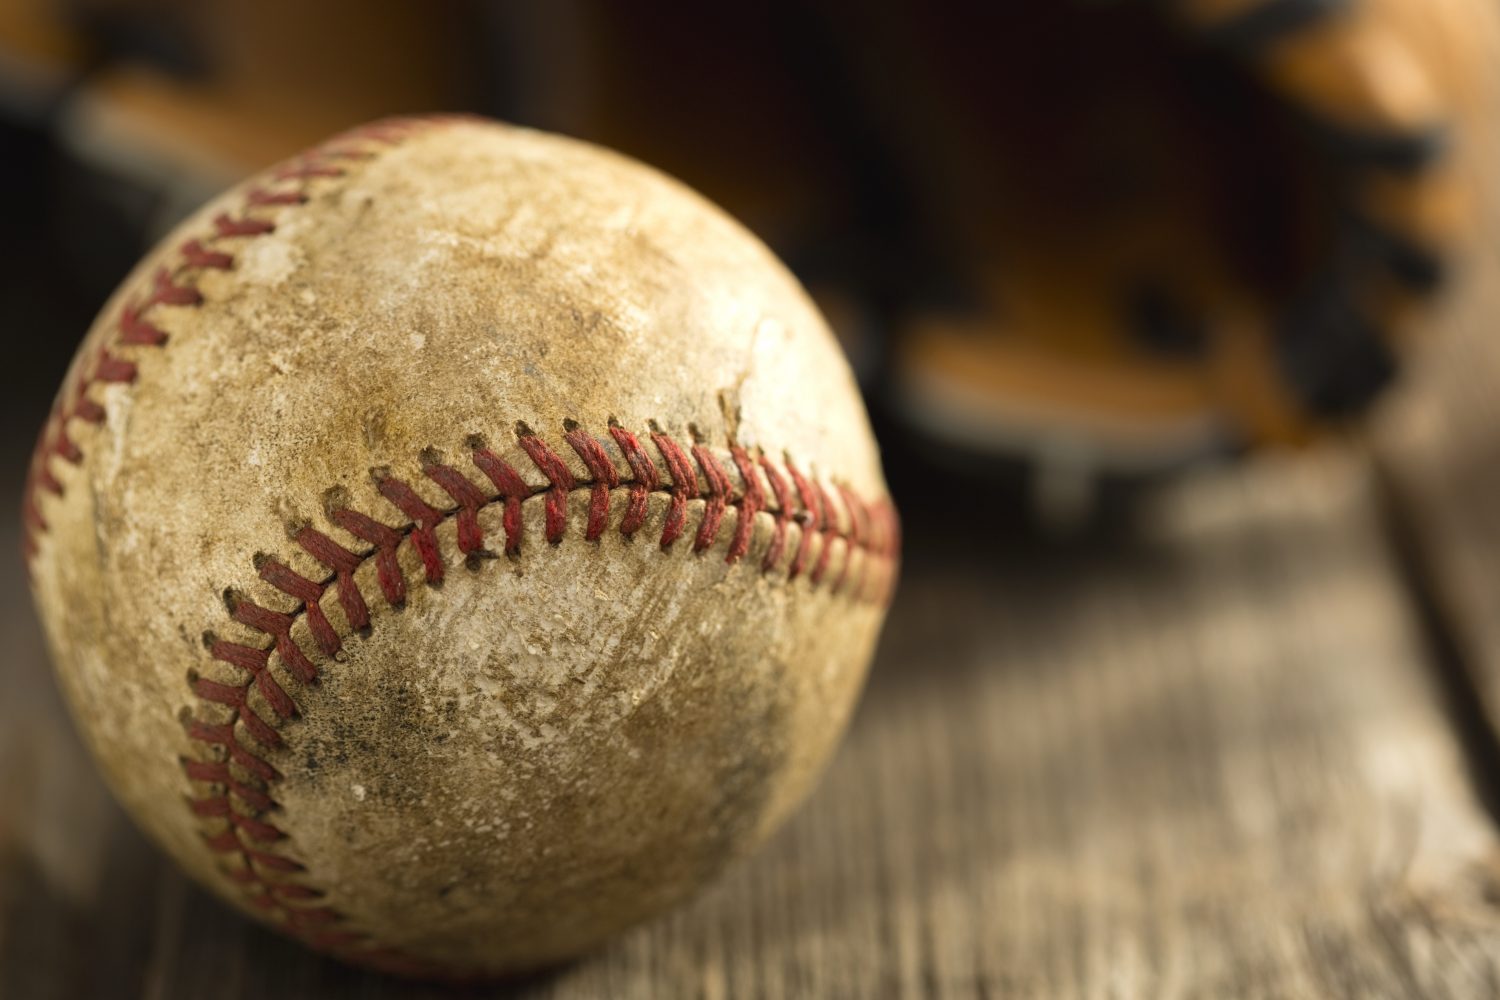 Merrill Baseball Hall of Fame announces inductees